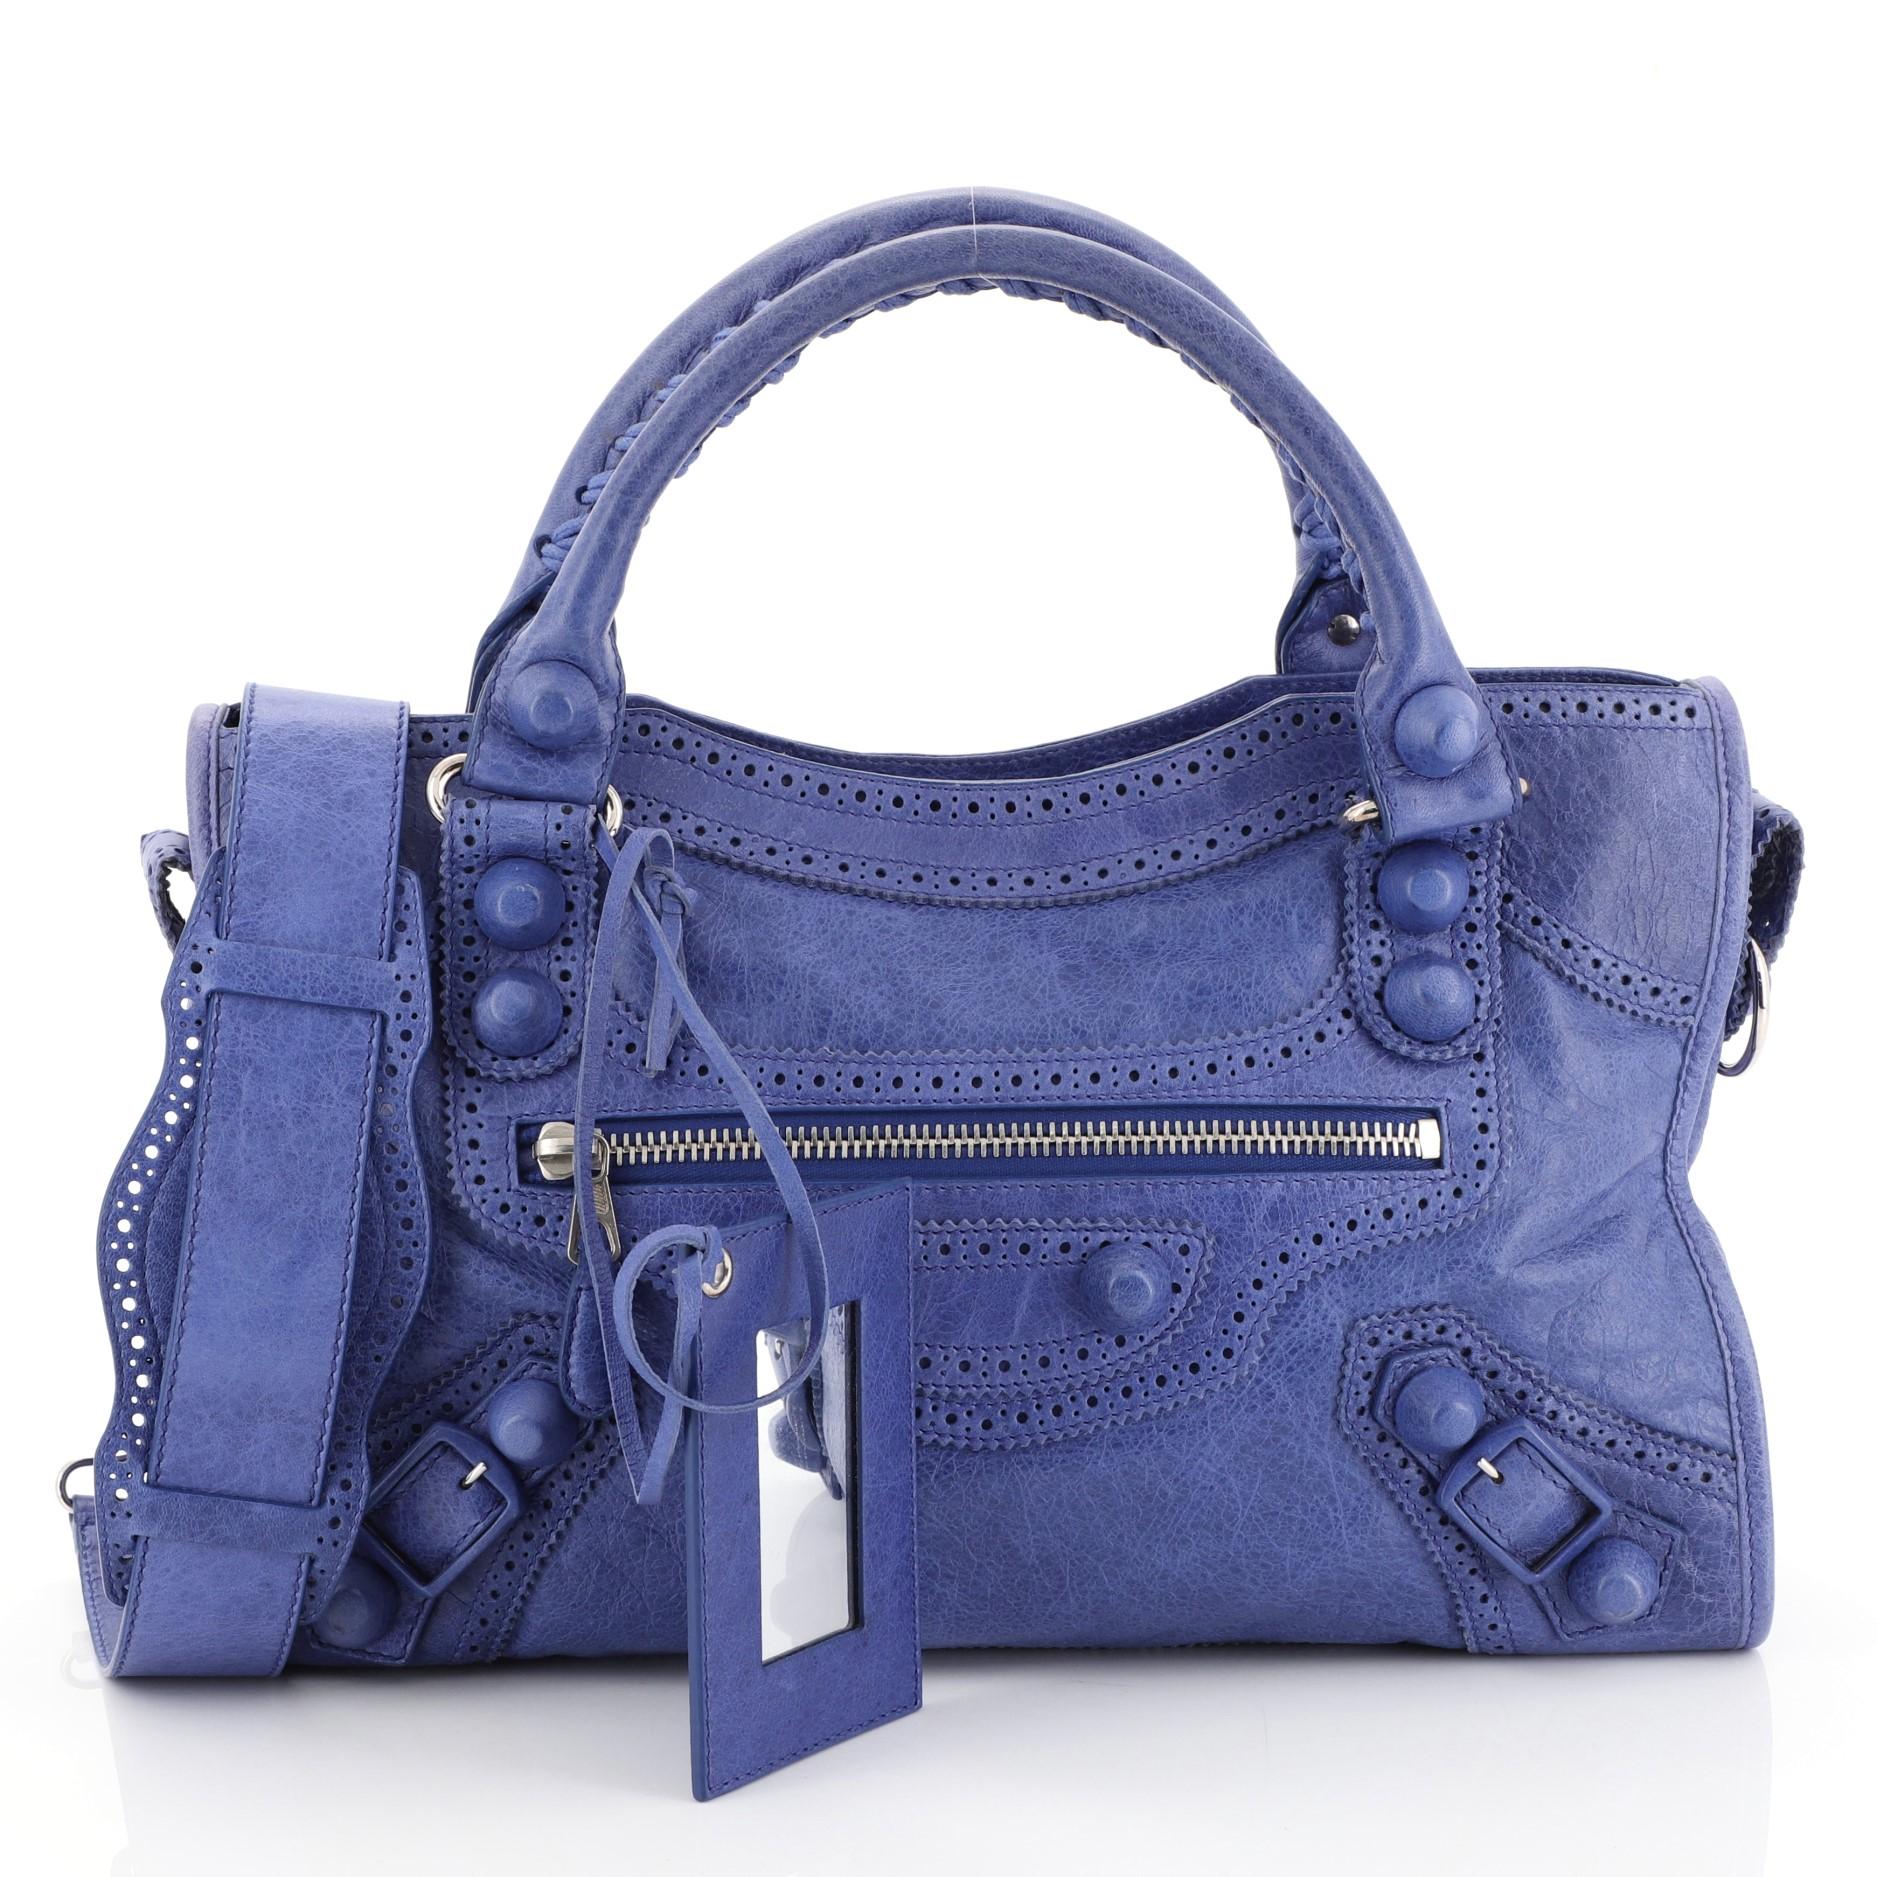 This Balenciaga City Giant Brogues Bag Leather Medium, crafted in blue leather, features braided woven handles, leather perforated trim, front zip pocket, and silver-tone hardware. Its top zip closure opens to a black fabric interior with side zip